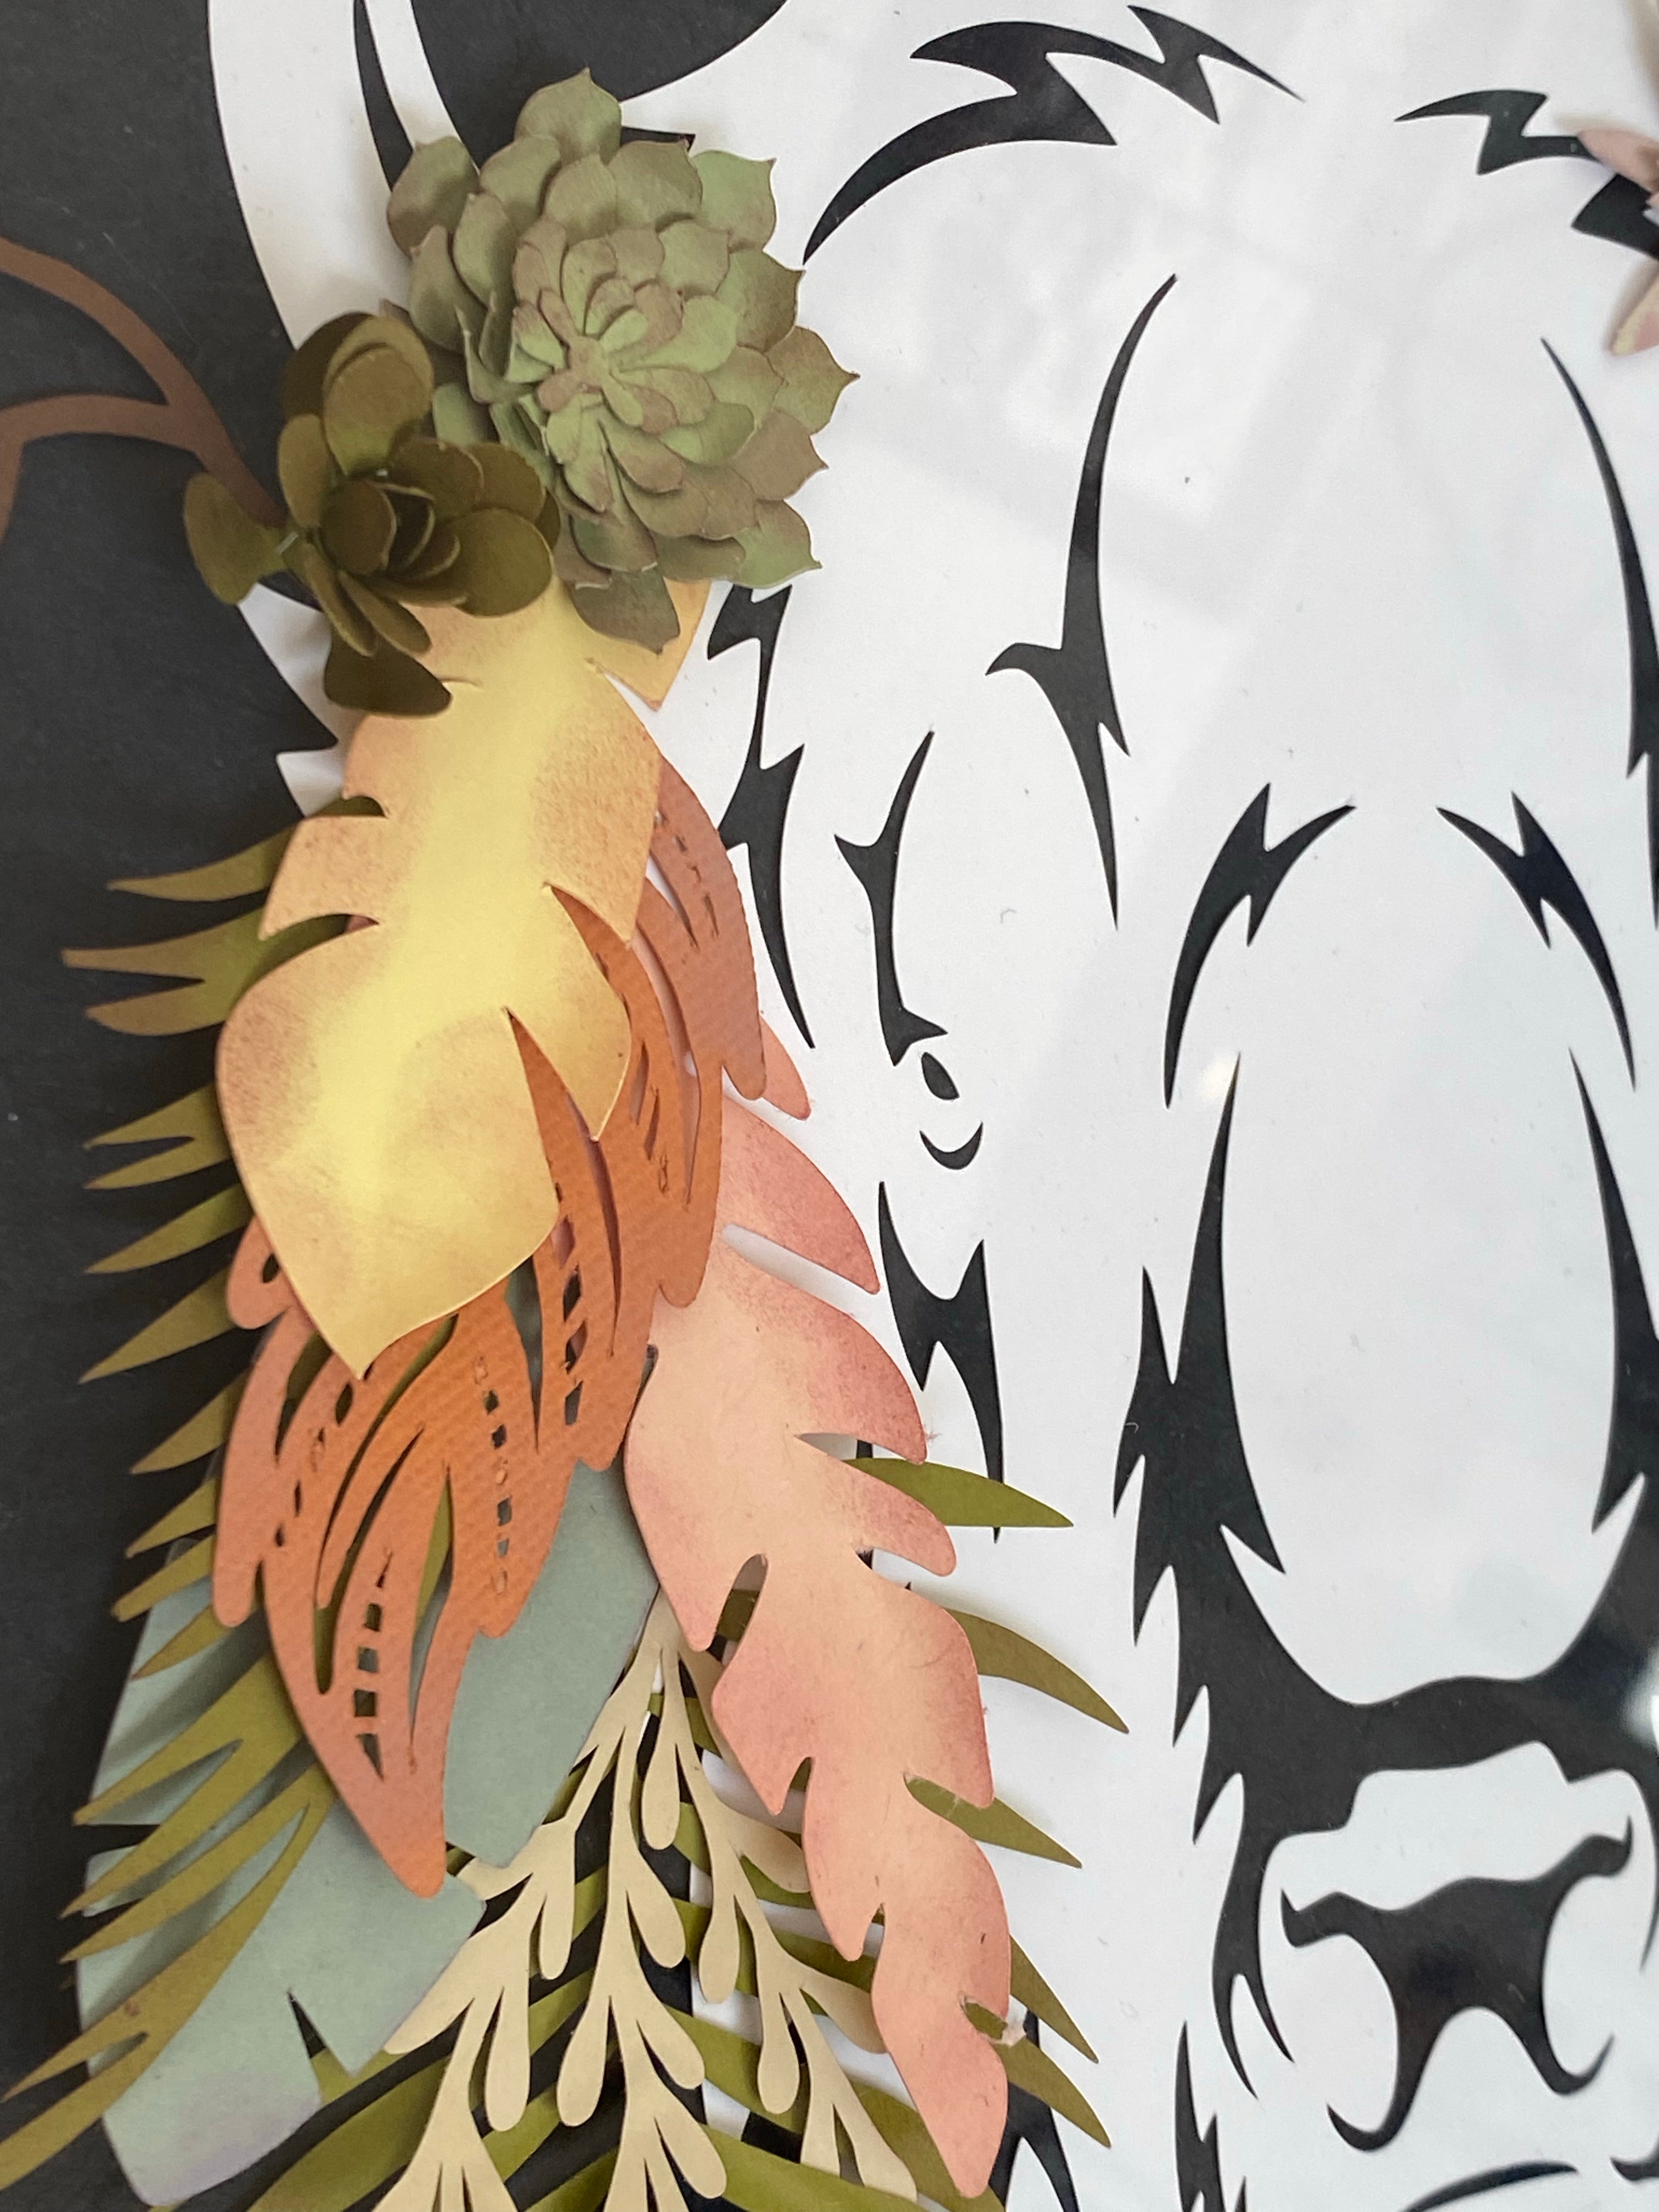 Beauty in the Bison - Paper Art featuring Buffalo with a Succulent, Feather, and Fern Crown